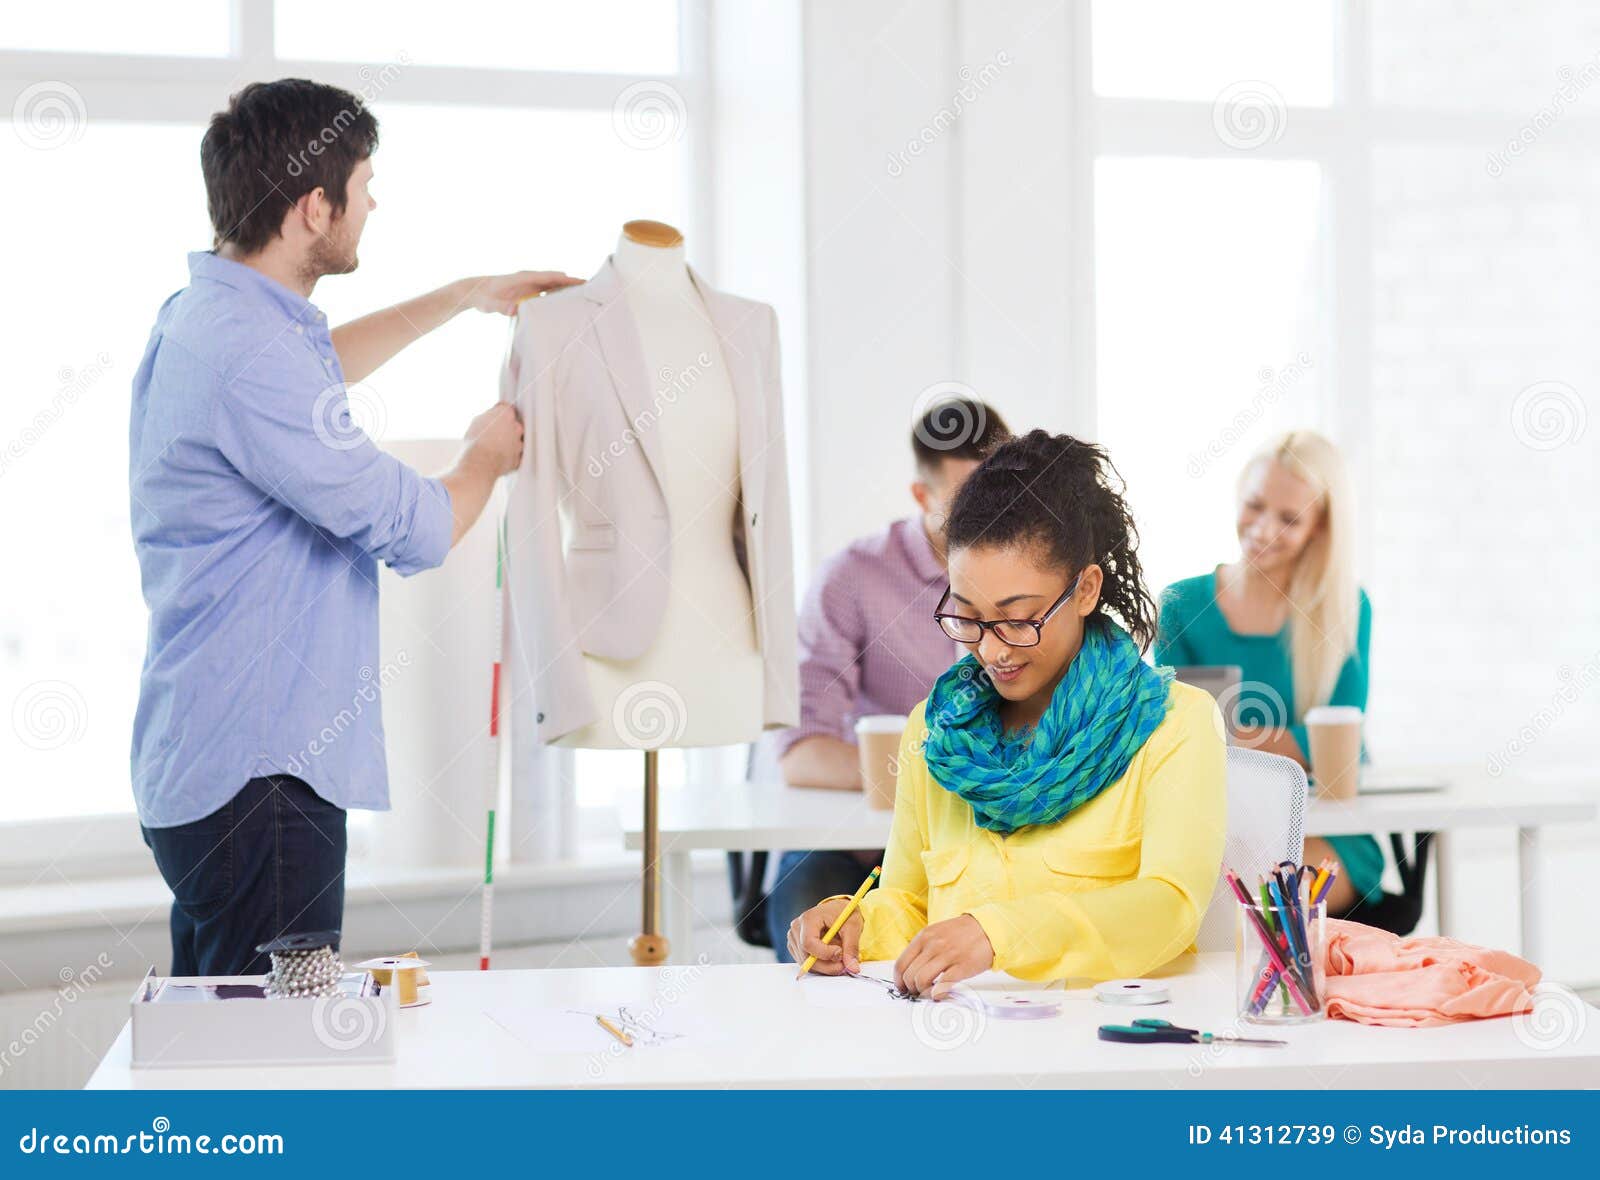 Smiling Fashion Designers Working in Office Stock Image - Image of ...